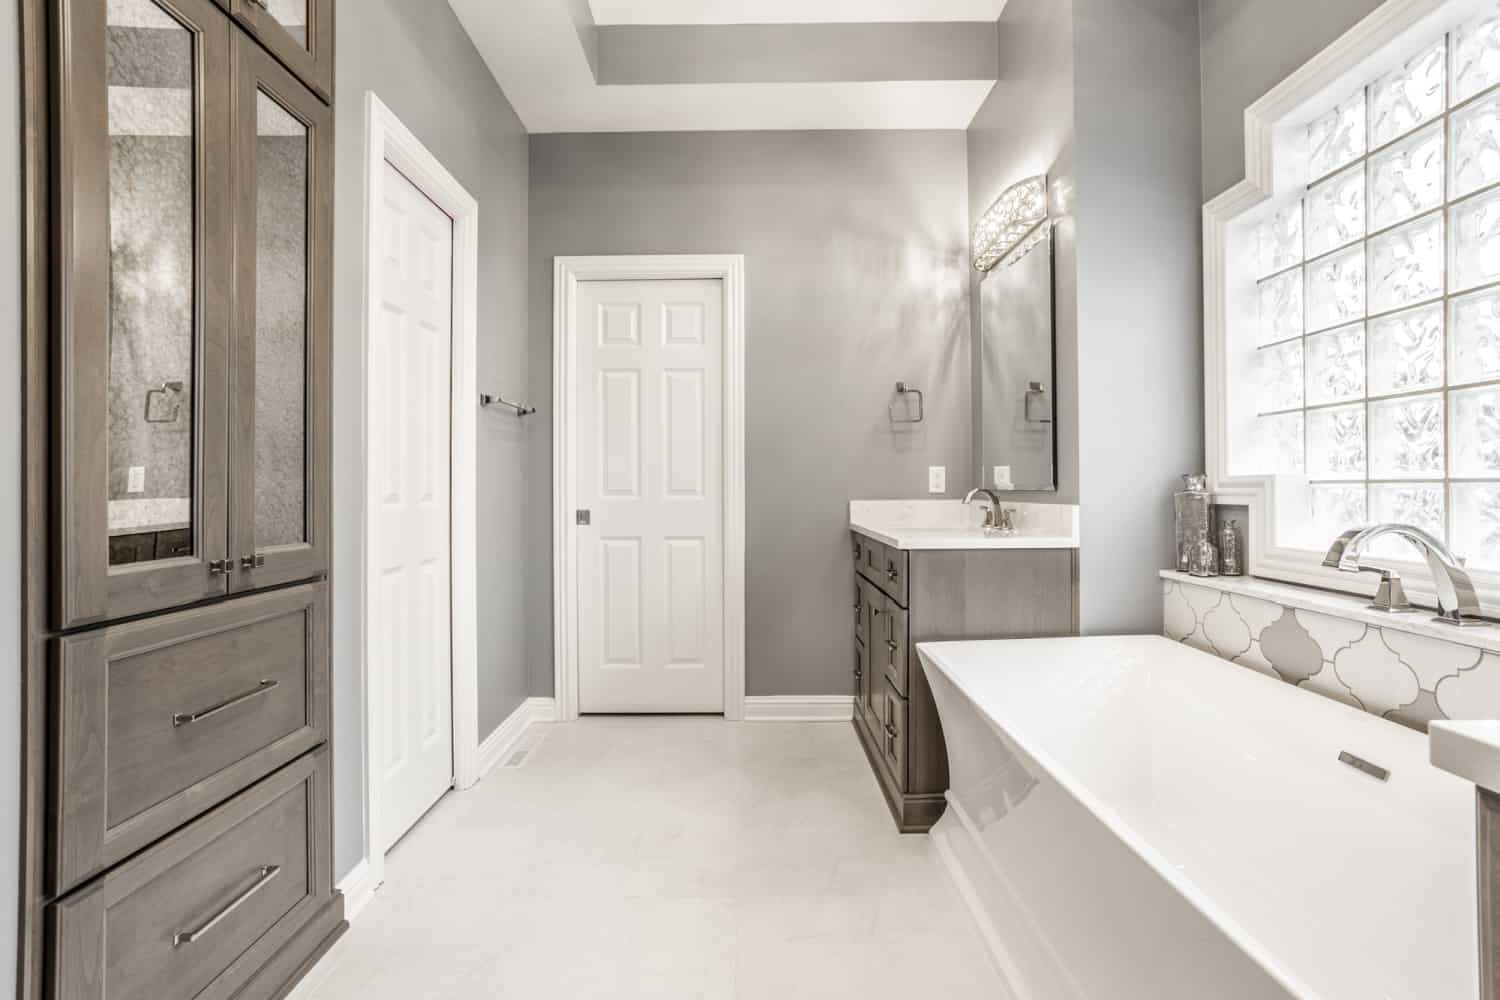 Nicholas Design Build | A bathroom with a tub and sink featuring a white and gray color scheme.